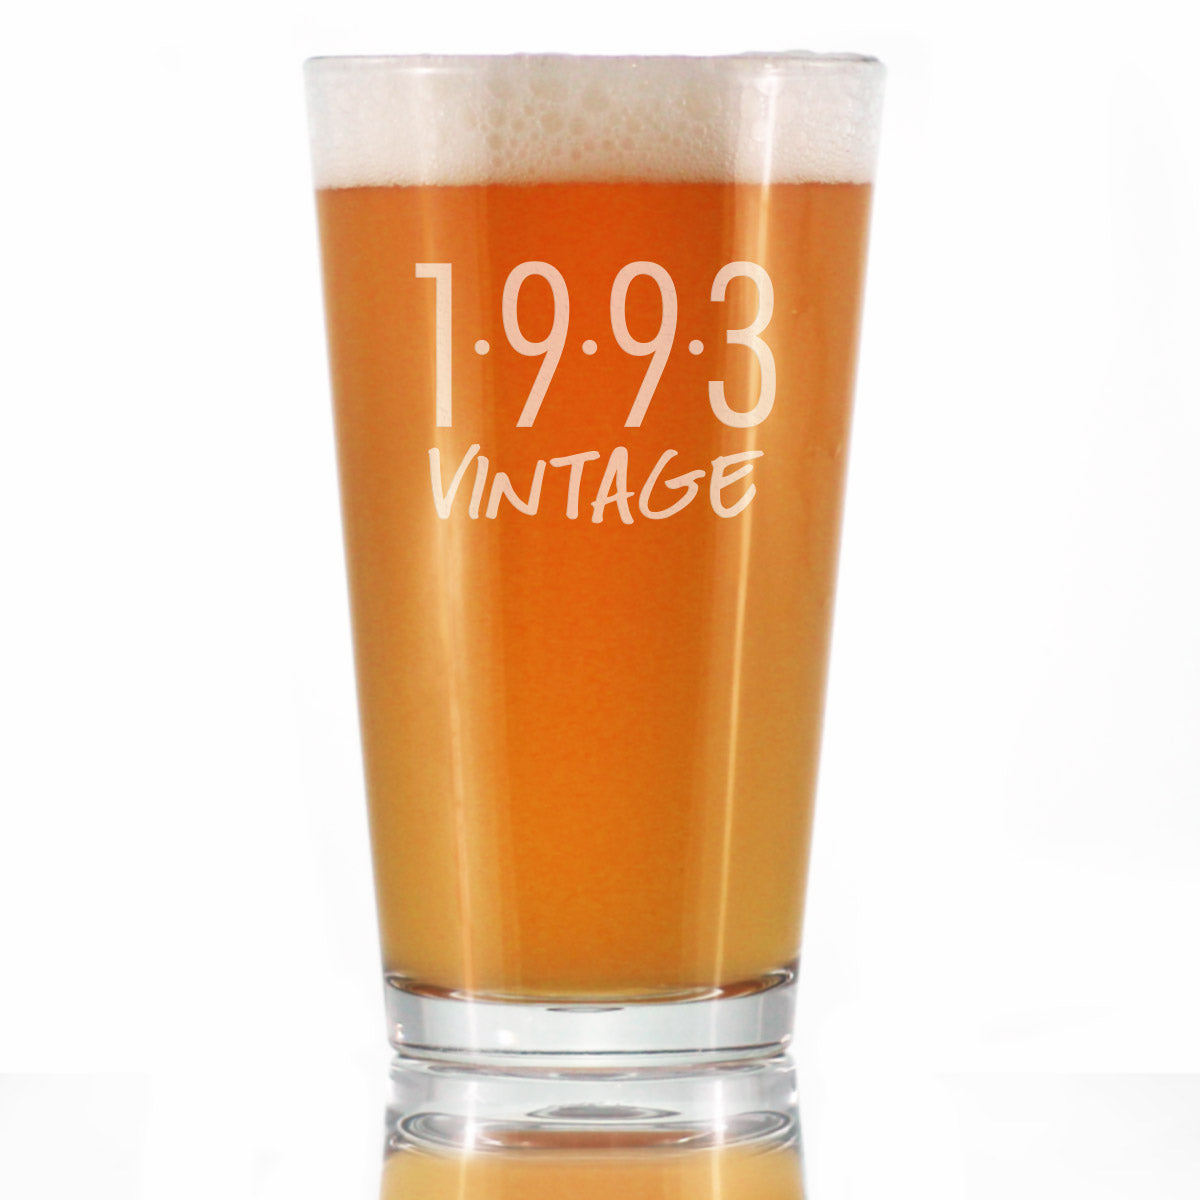 Vintage 1993 - Pint Glass for Beer - 30th Birthday Gifts for Men or Women Turning 30 - Fun Bday Party Decor - 16 oz